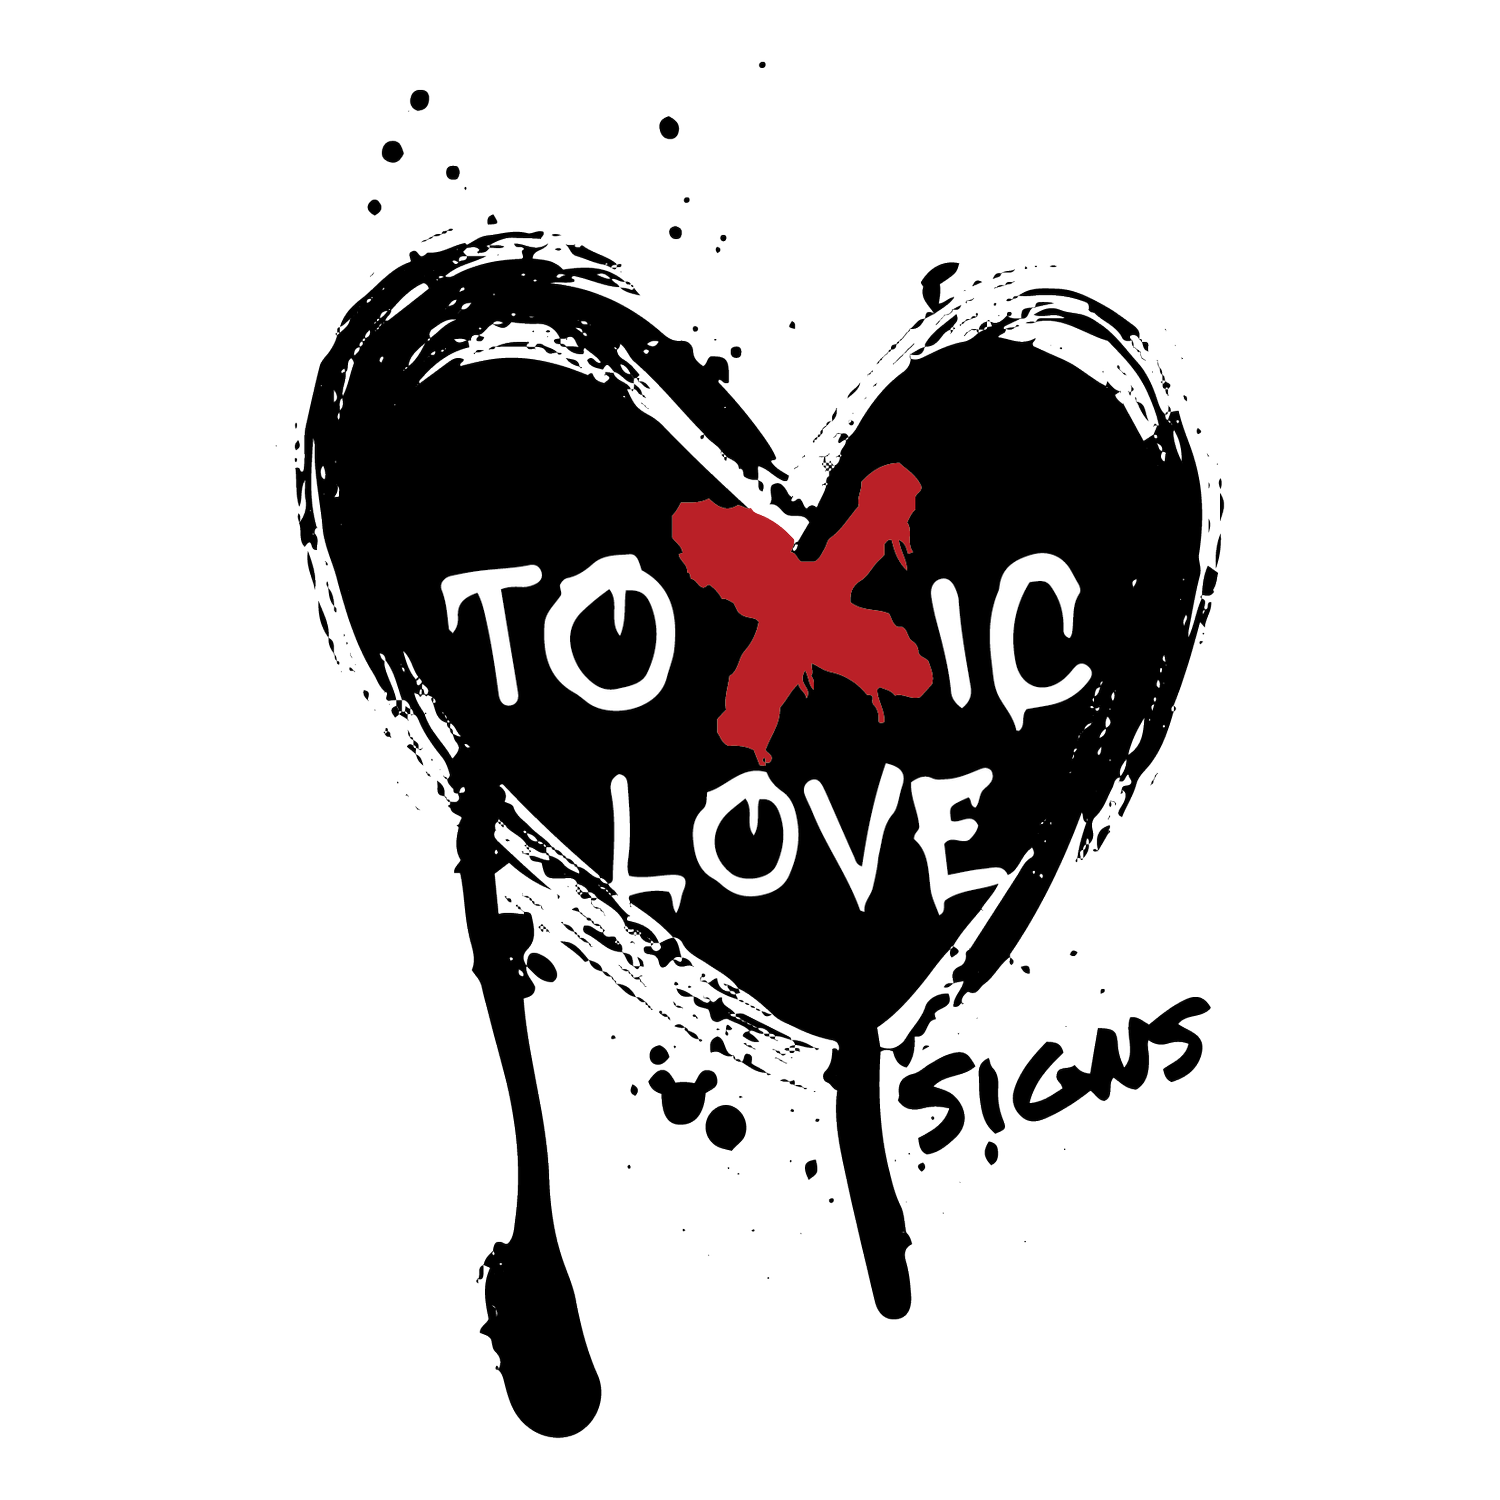 Toxic Love Signs